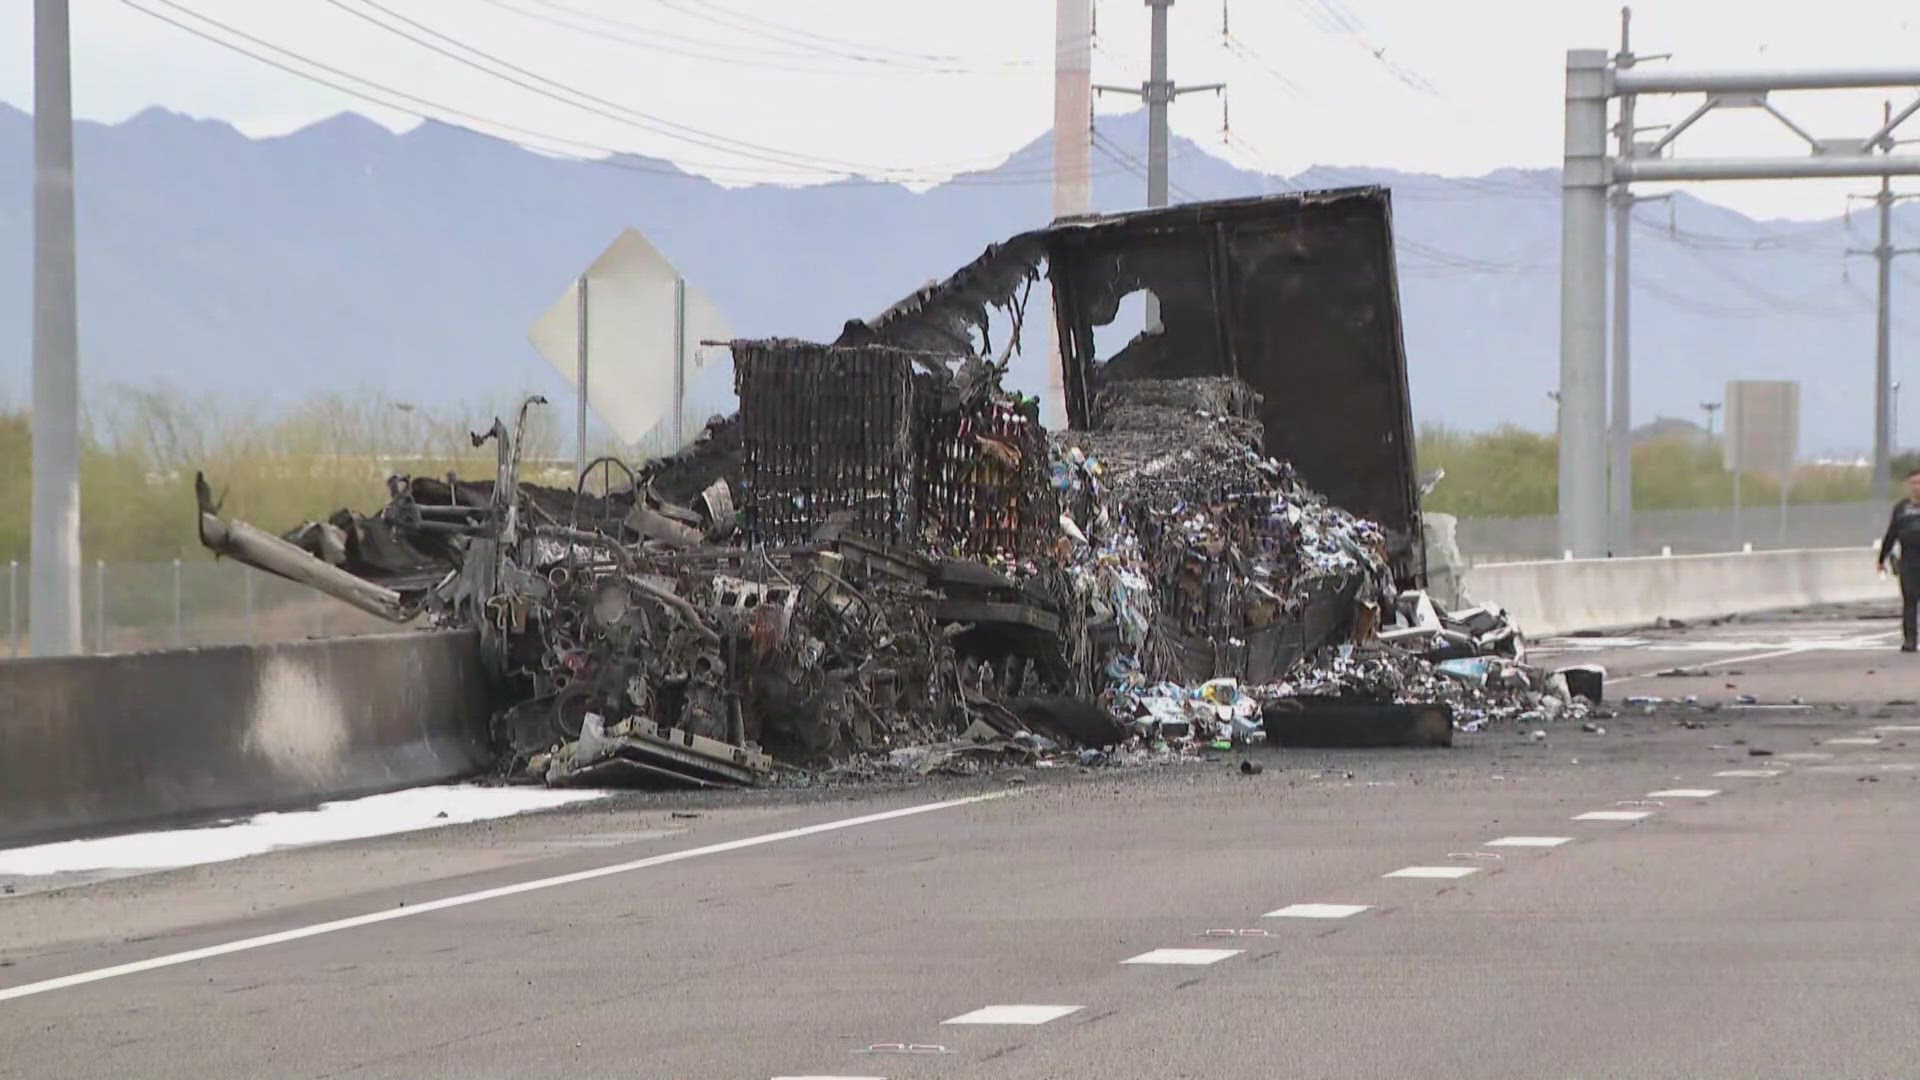 The wrong-way crash resulted in a semi-truck catching fire on Loop 202 in Phoenix.